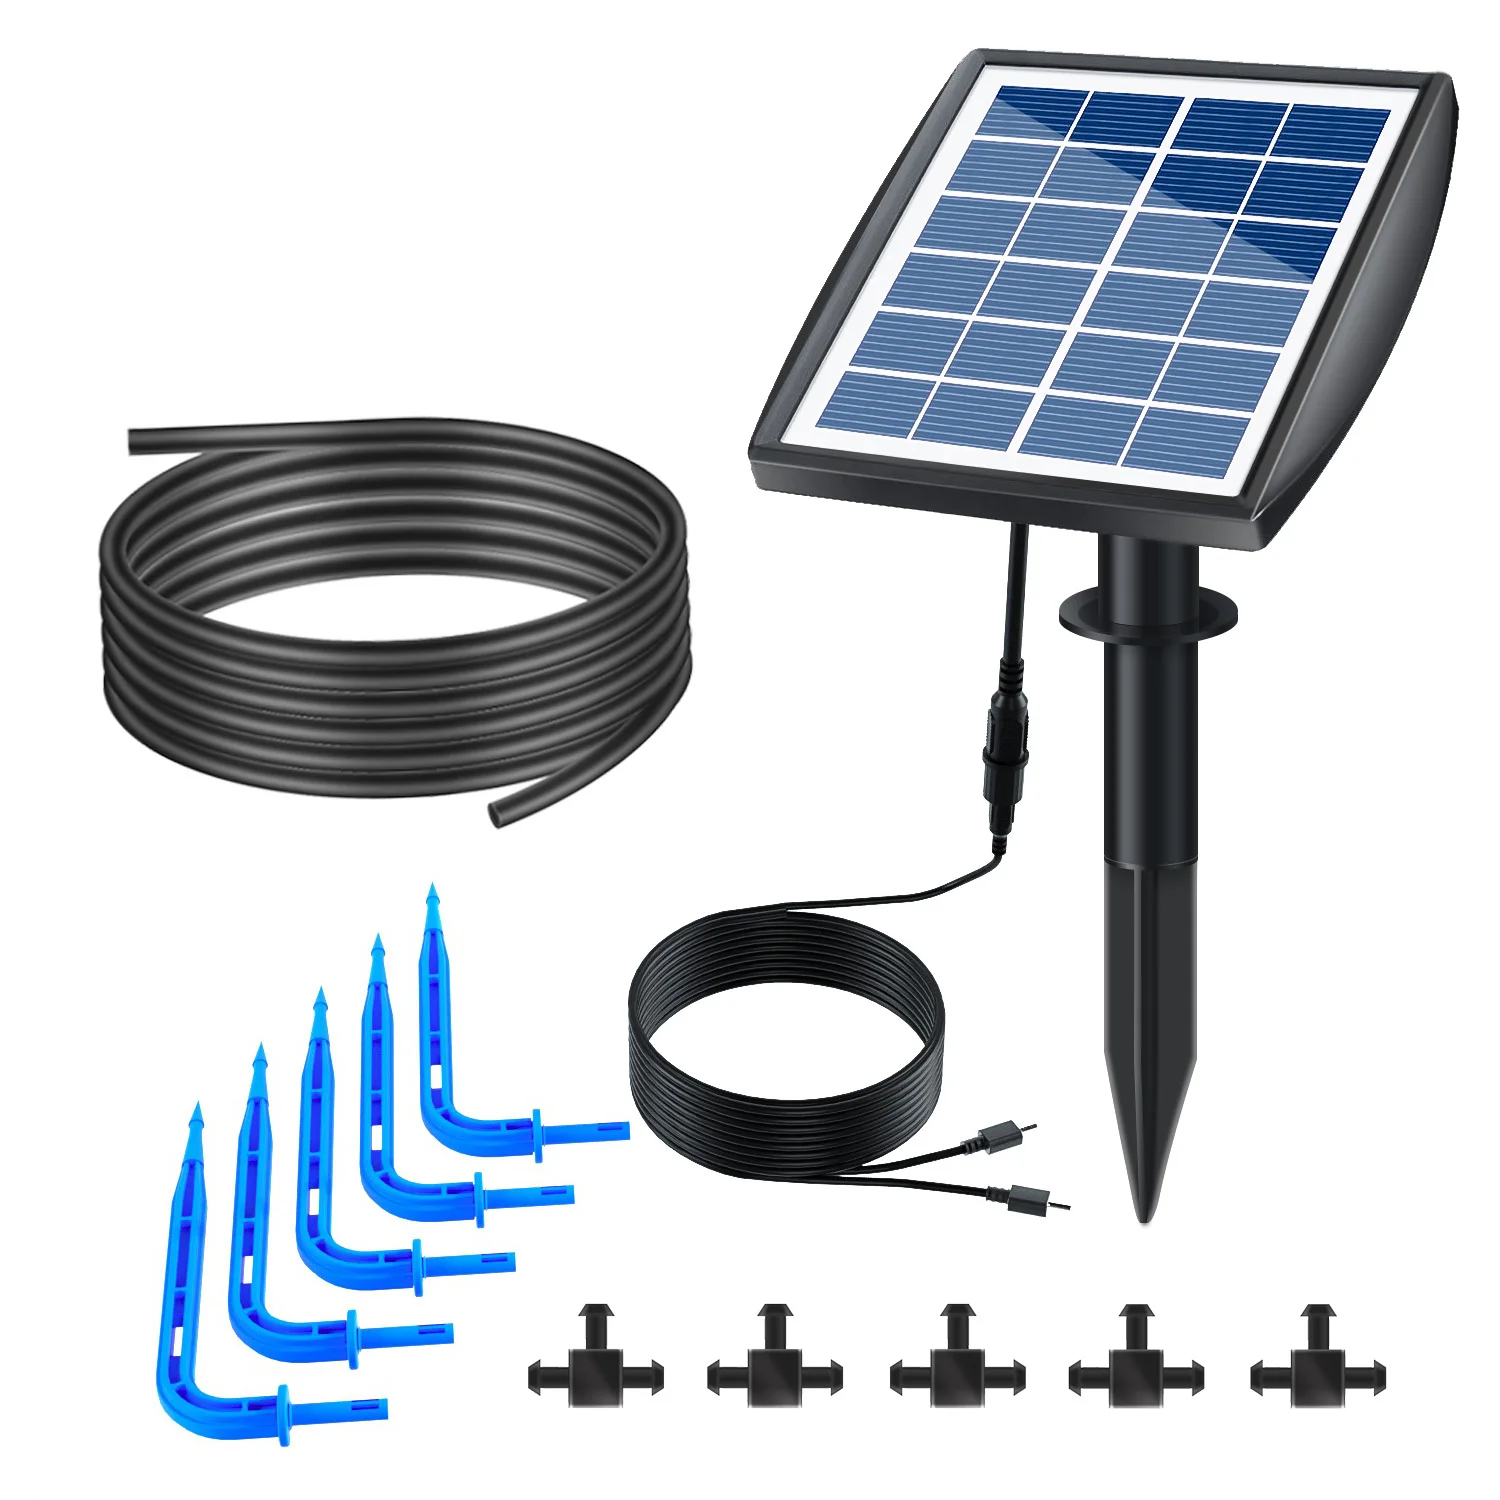 

Solar Auto Watering System Solar Powered Automatic Drip Irrigation Kit for Plants on The Balcony in The garden